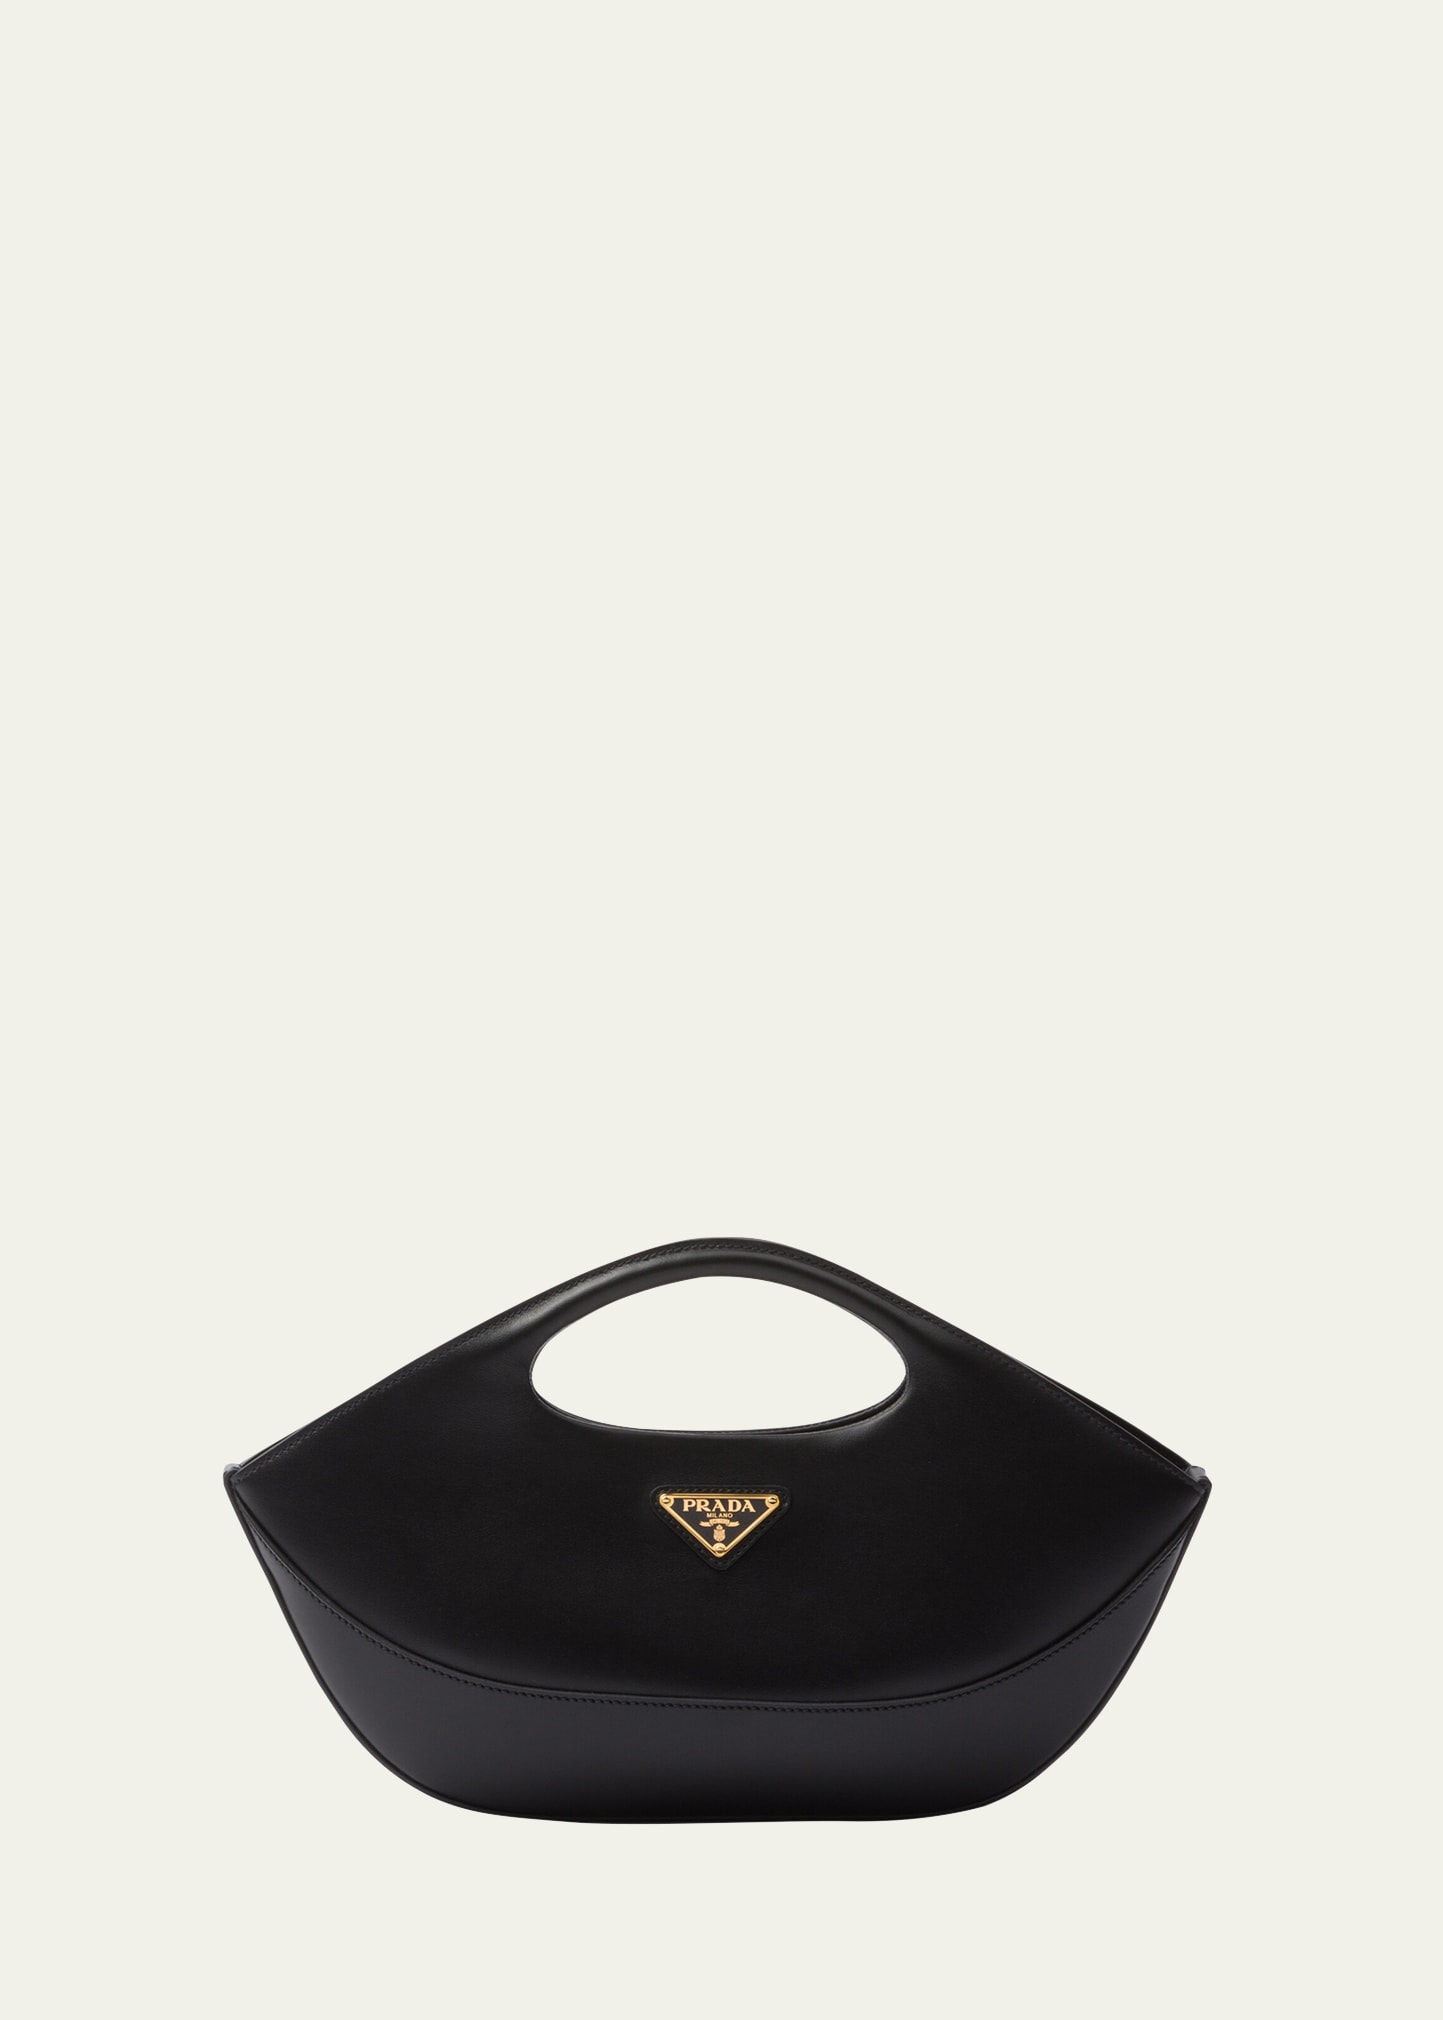 Prada Structured Leather Tote With Top Handle In F0002 Nero